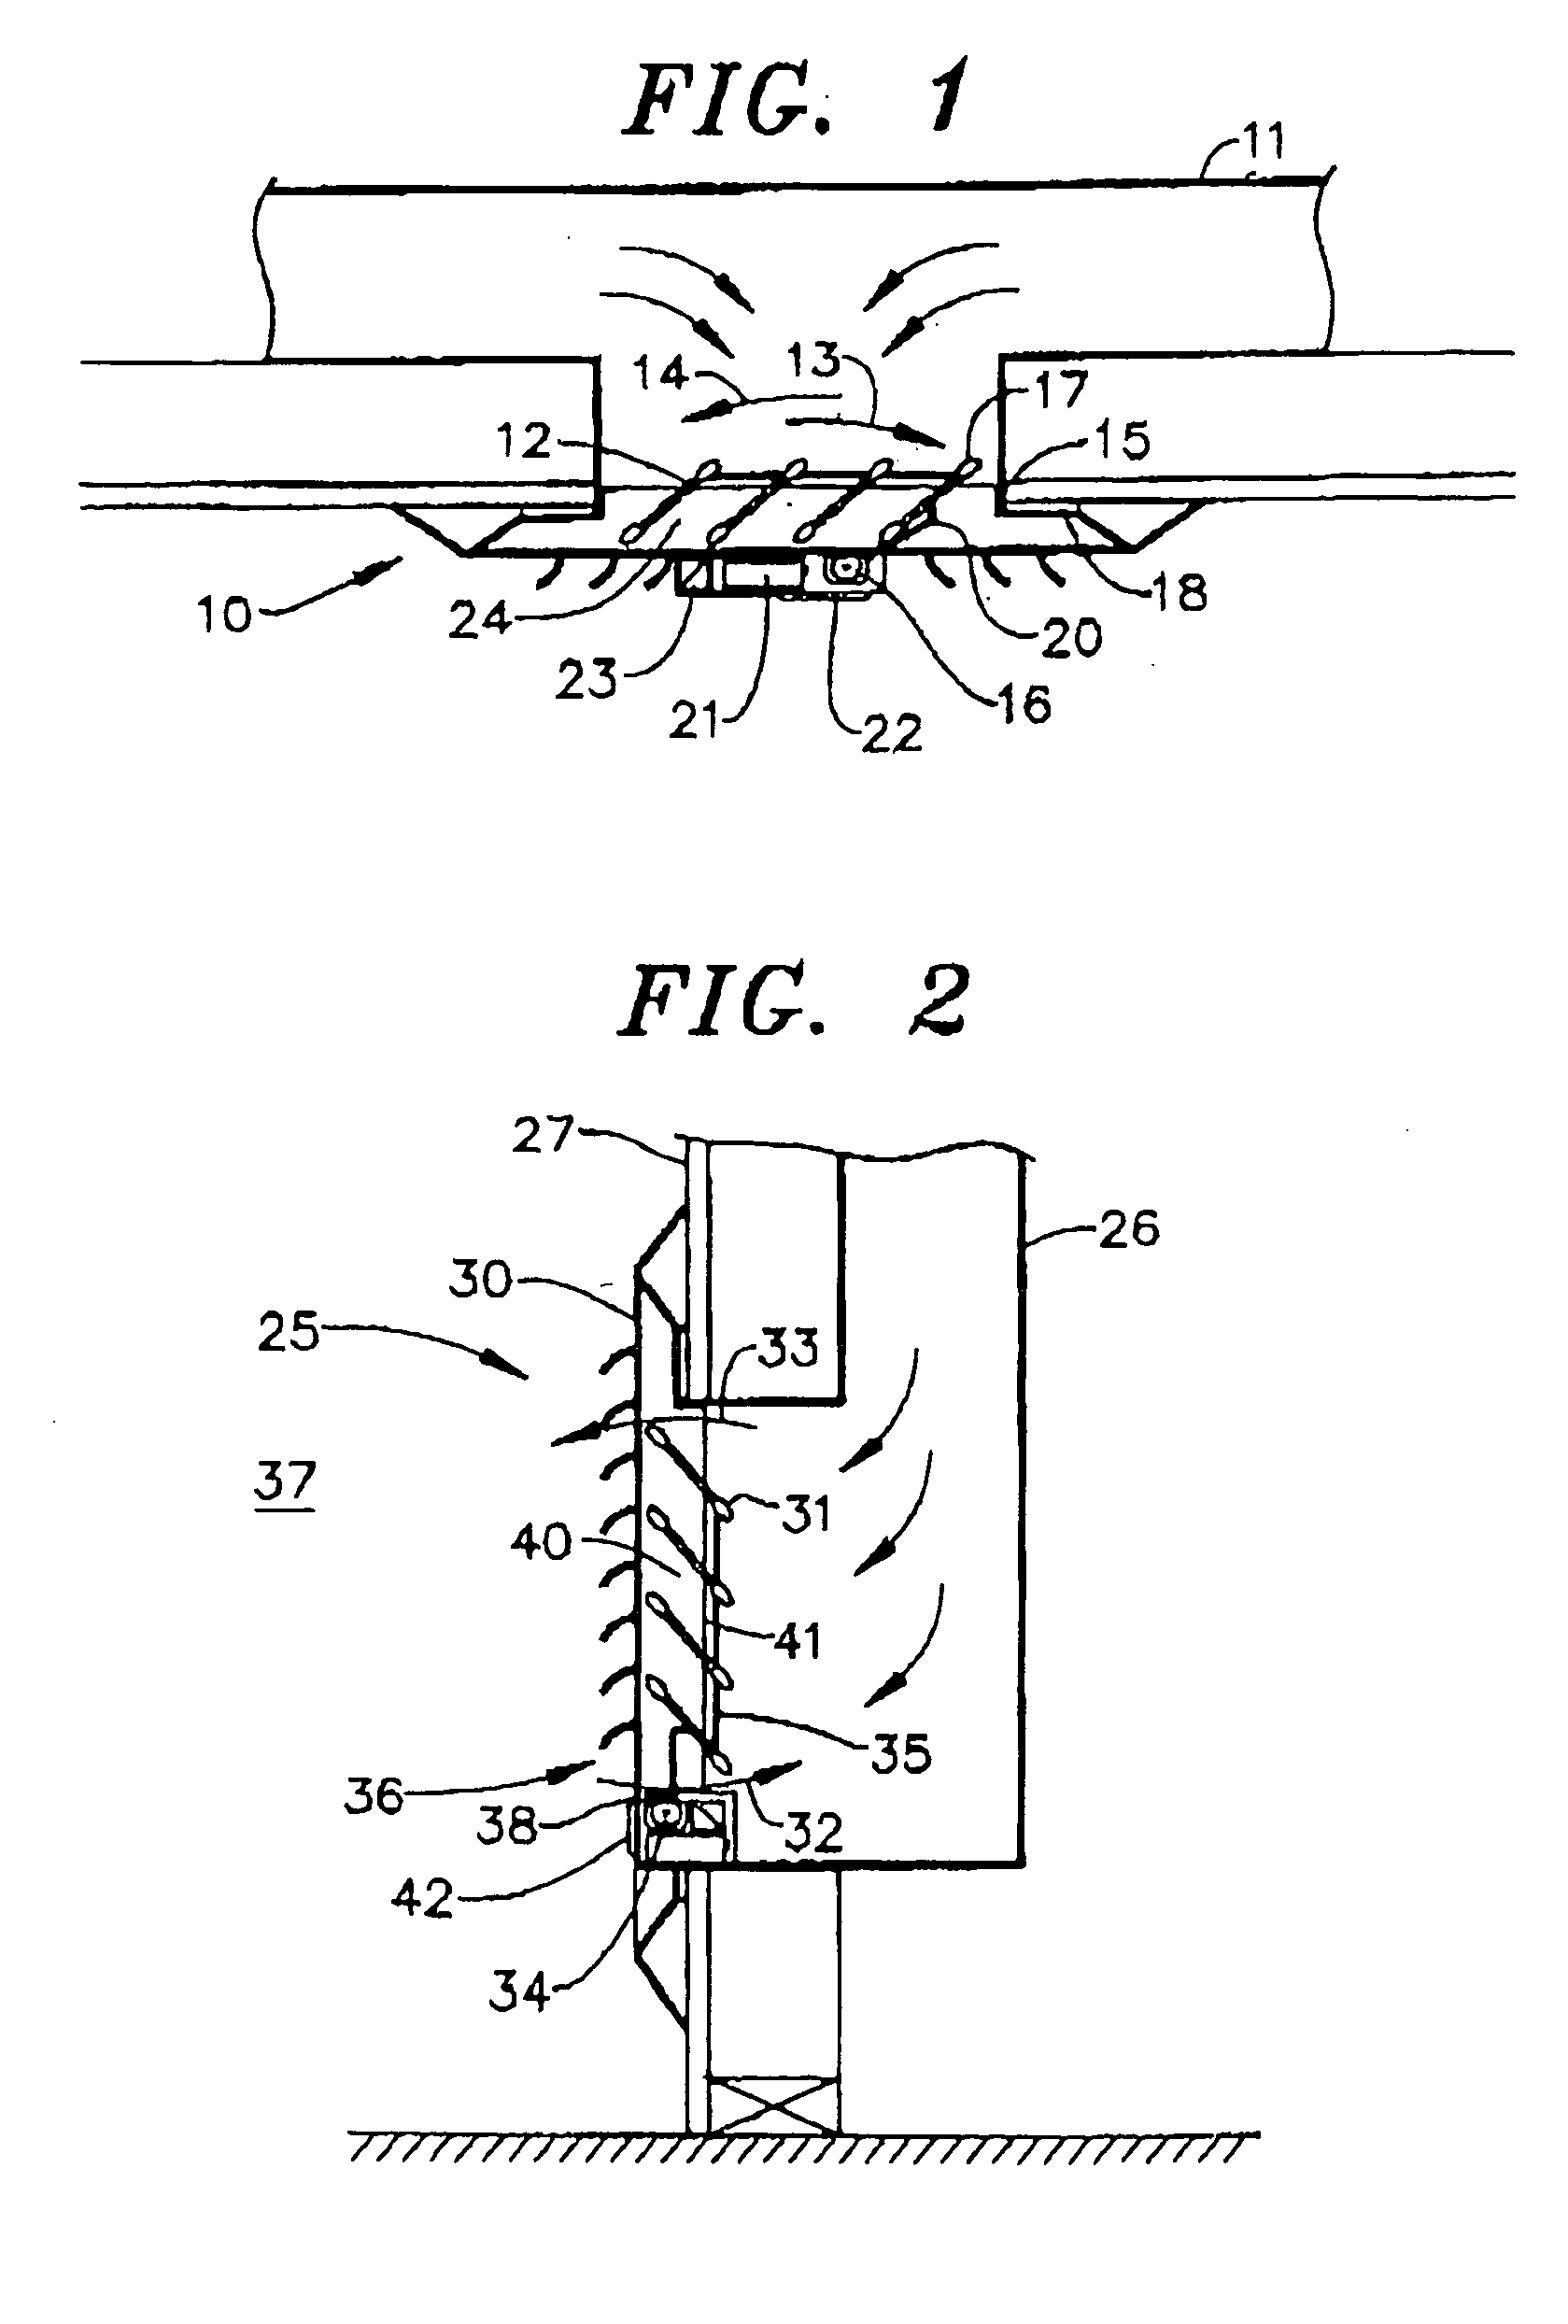 Electromagnetic frequency-controlled zoning and dampering system